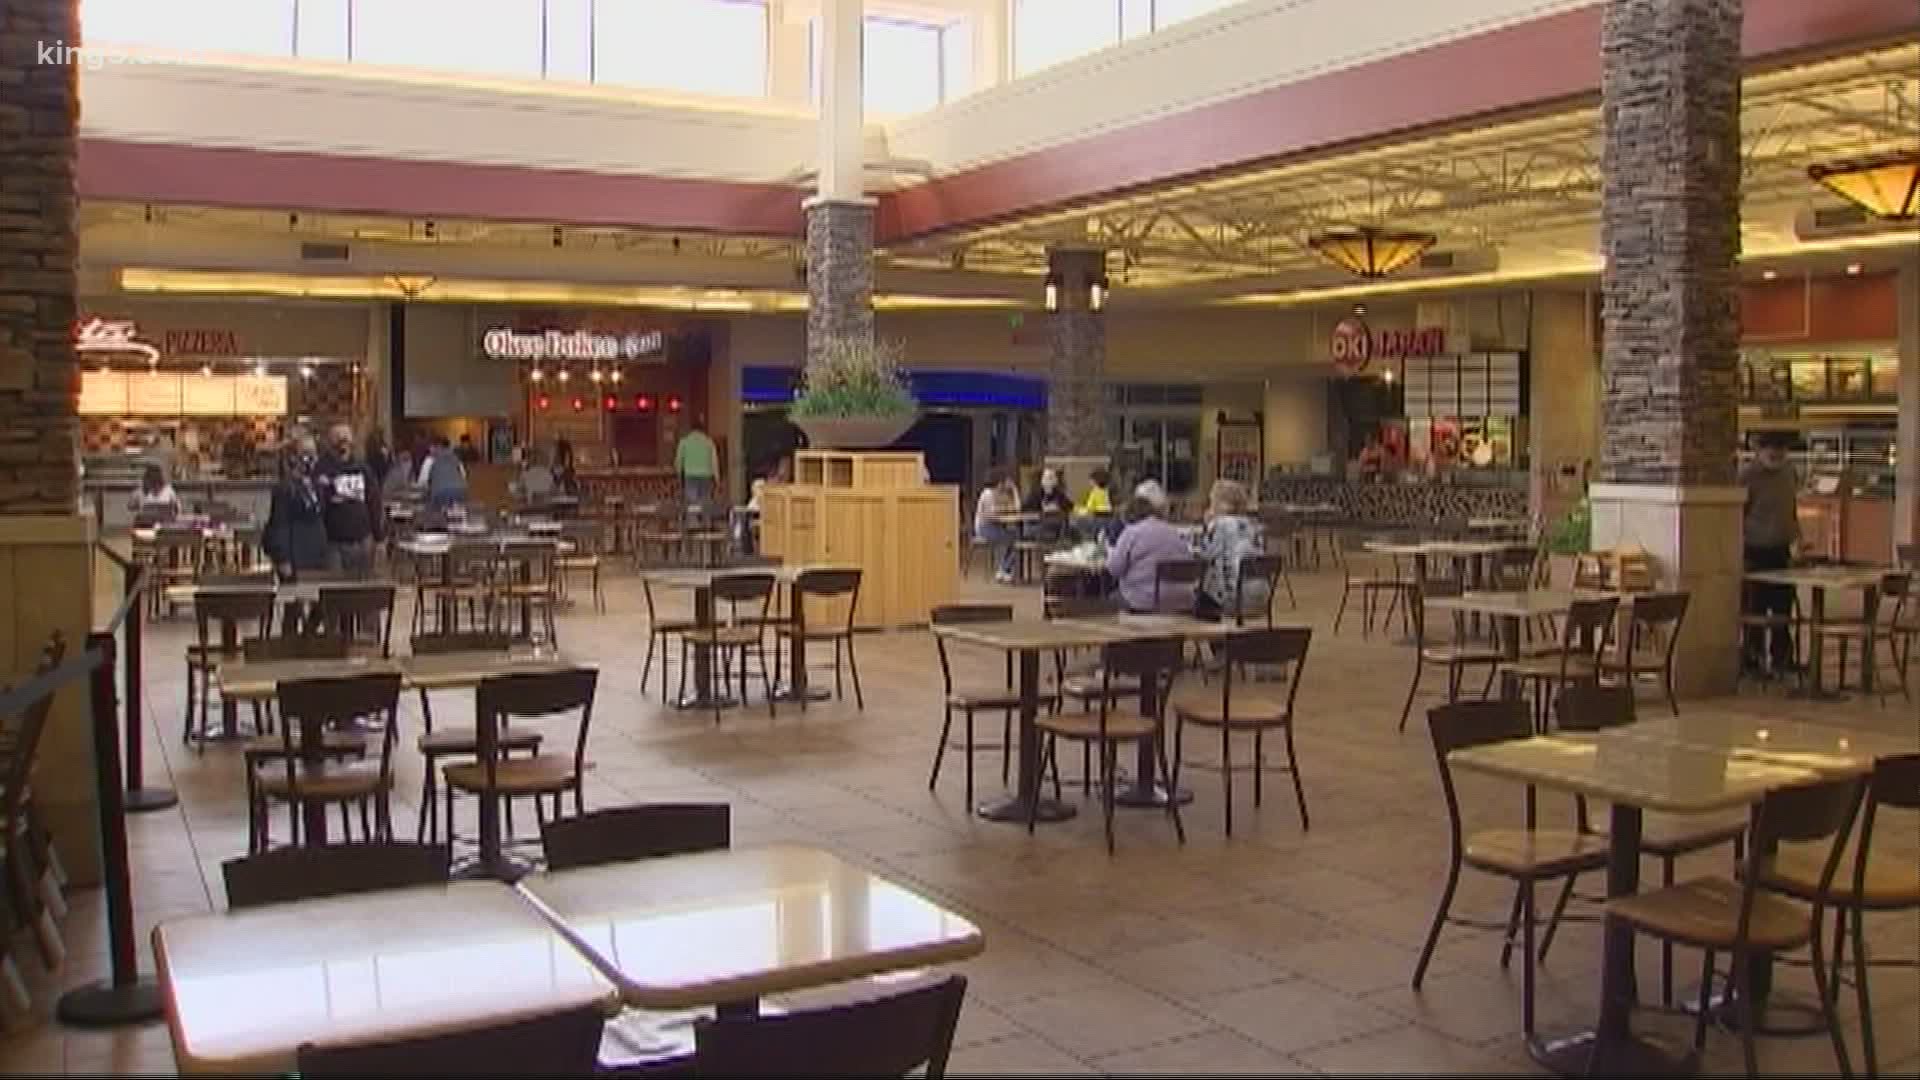 South Hill Mall in Puyallup reopened this weekend after Pierce County got the go-ahead to move into Phase 2 of the state's Safe Start reopening plan.